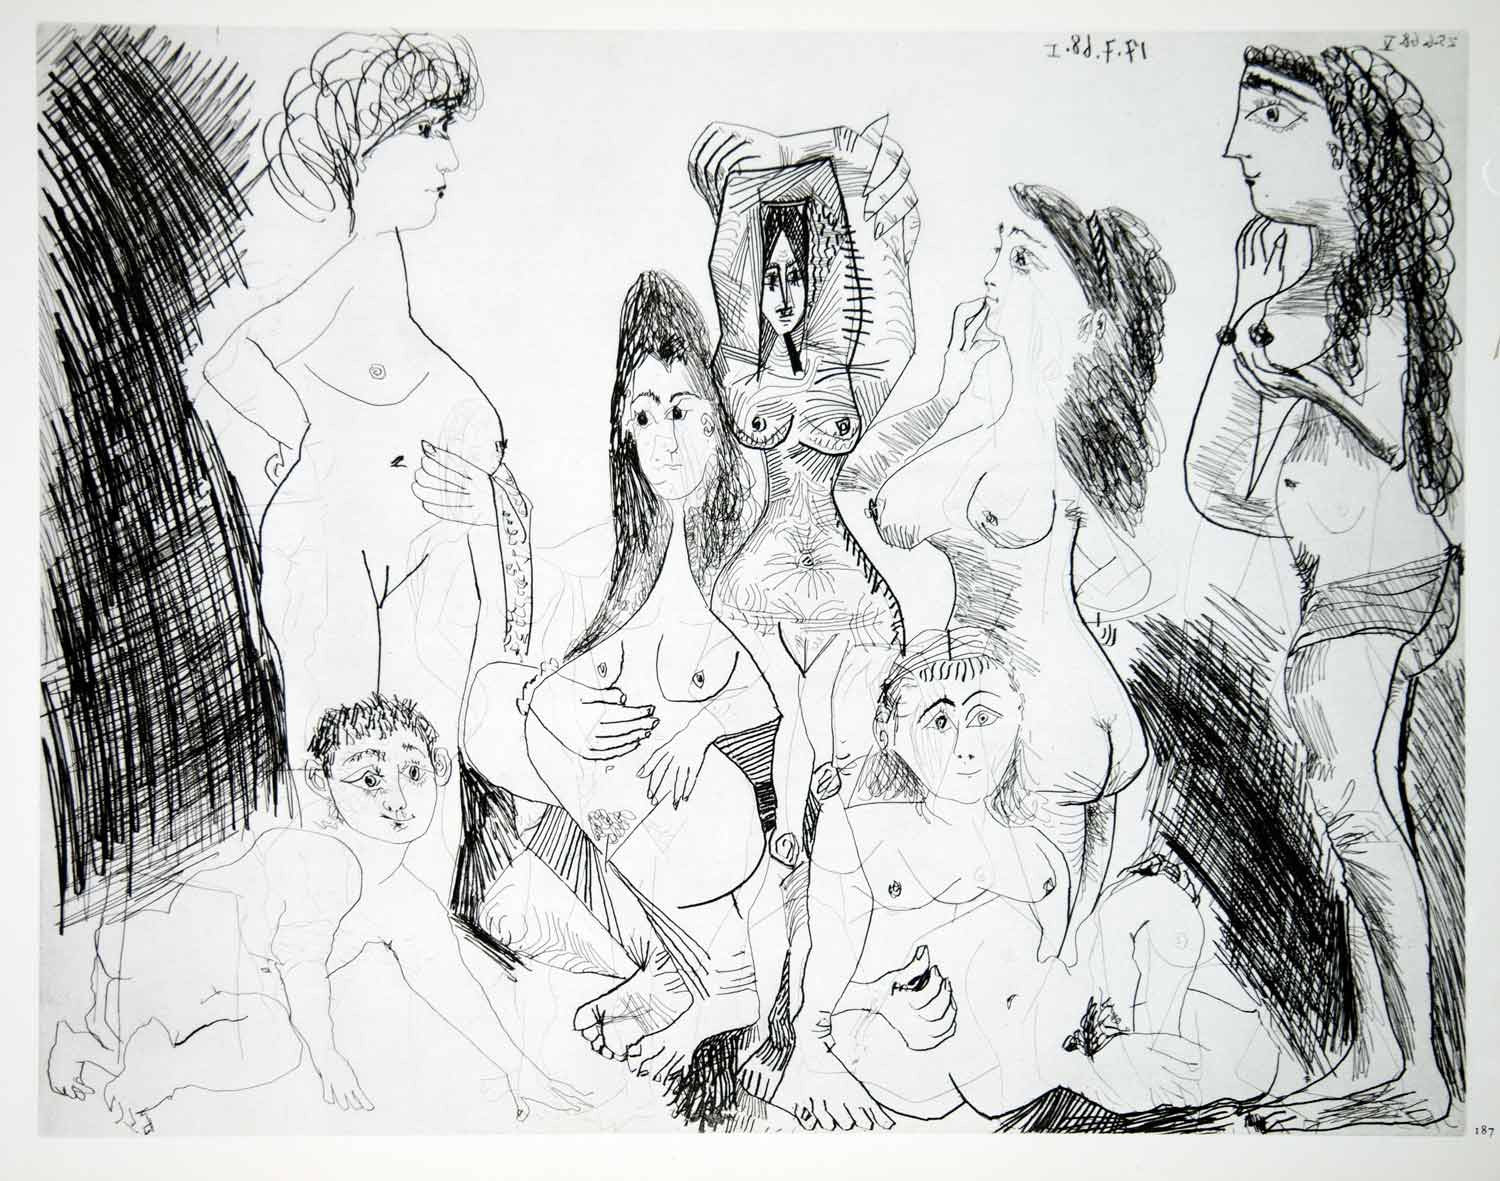 1970 Heliogravure Pablo Picasso Nudes Female Figures Group Women Etching P347B - Period Paper
